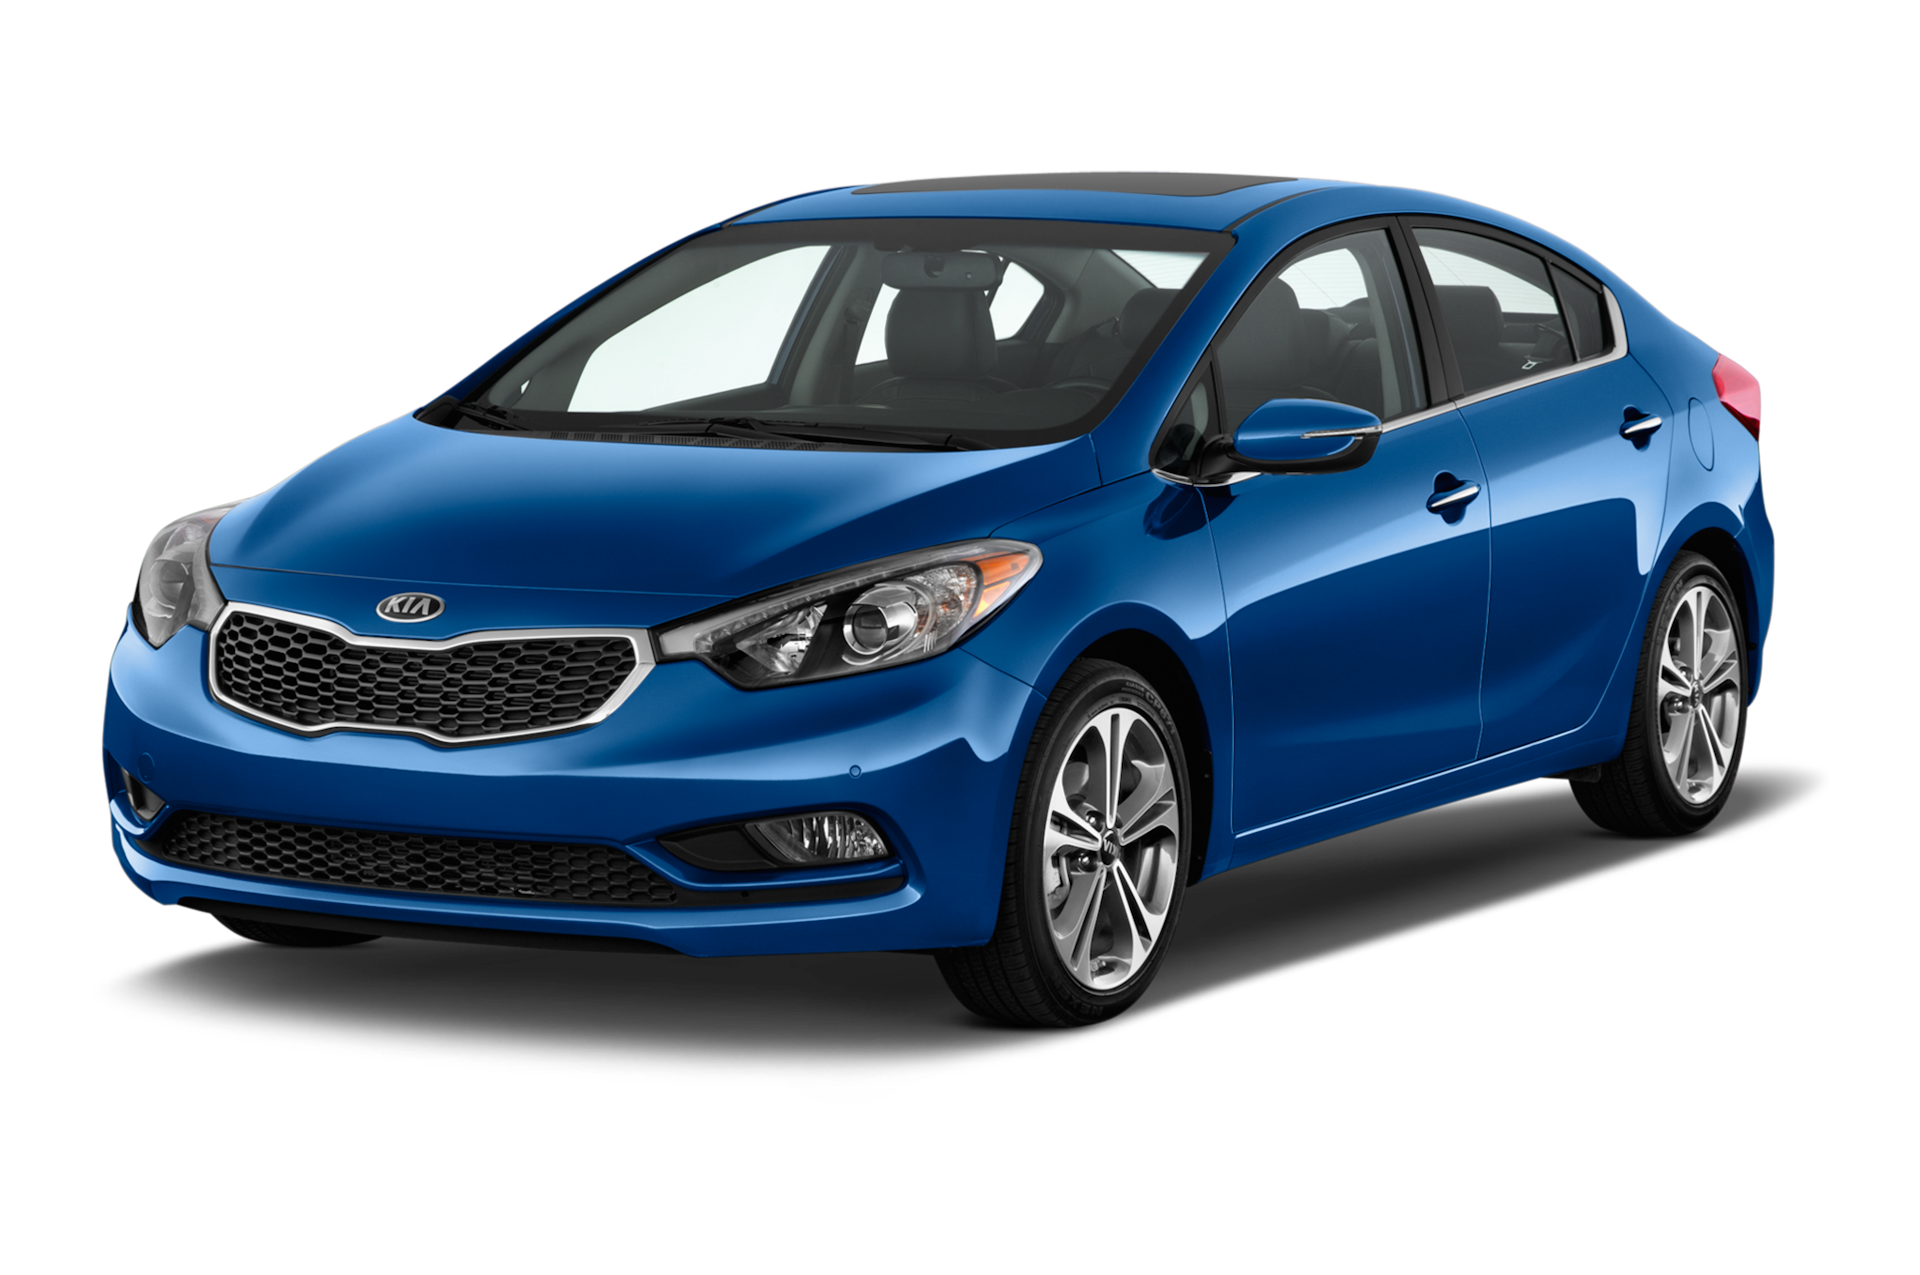 2014 Kia Forte Prices, Reviews, and Photos - MotorTrend